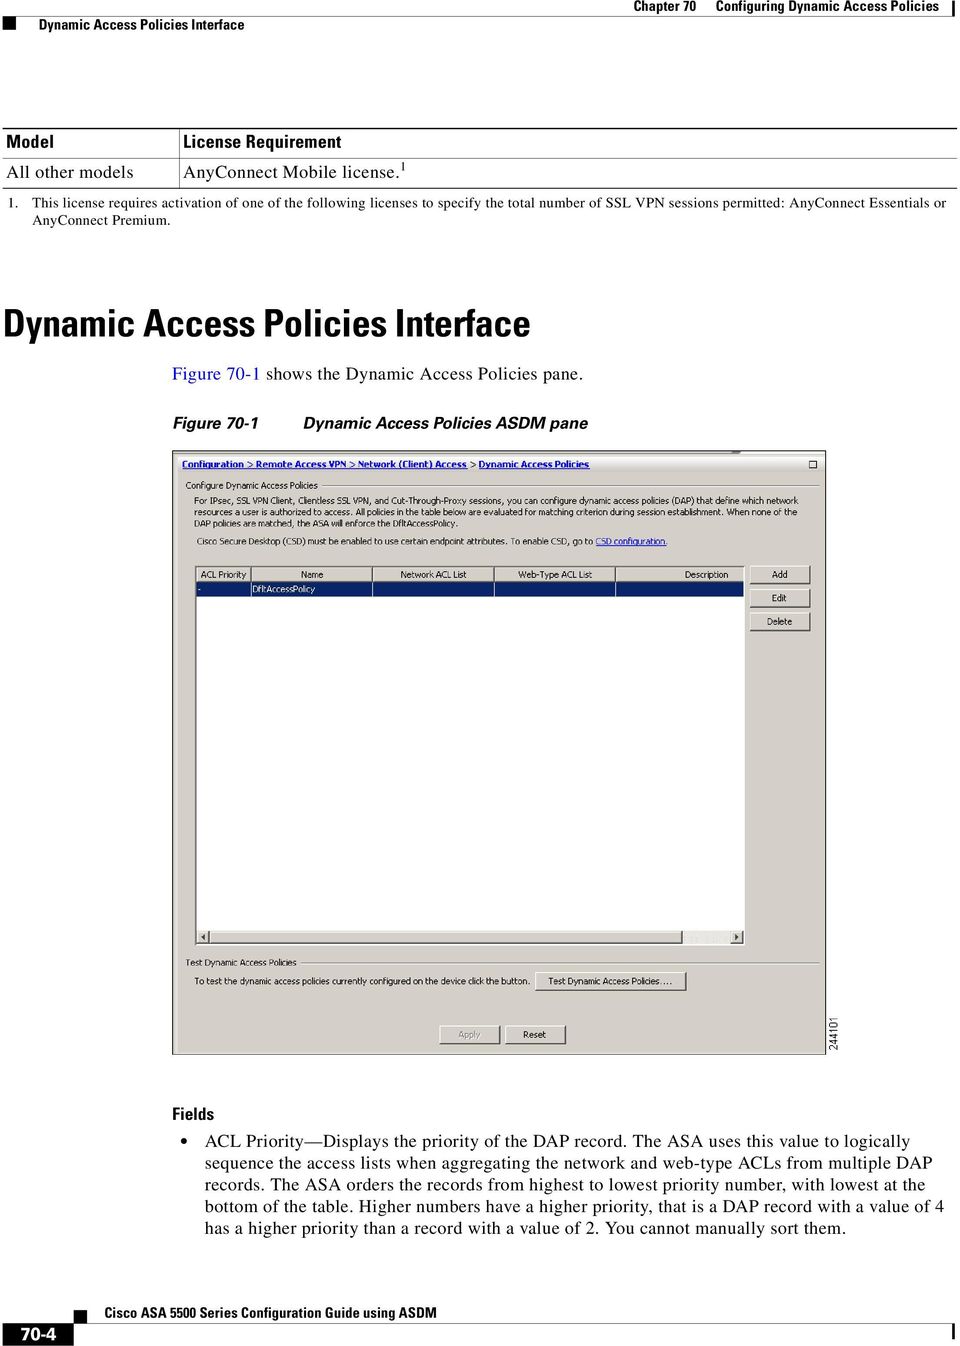 Configuring Dynamic Access Policies Pdf Free Download